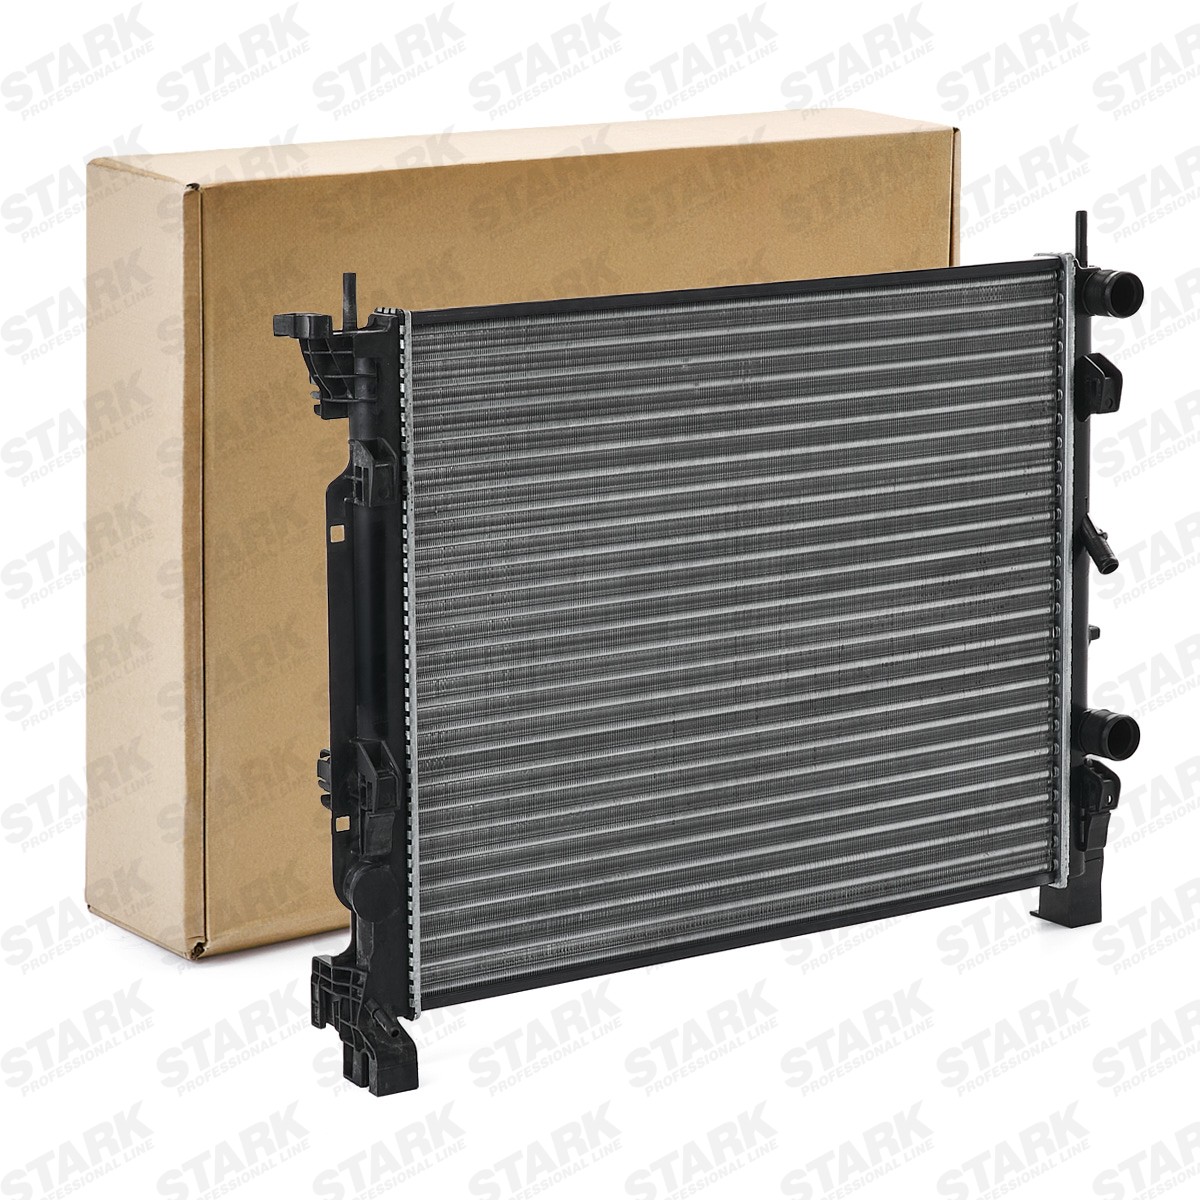 STARK SKRD-0121294 Engine radiator Aluminium, for vehicles with air conditioning, for manual transmission, Brazed cooling fins